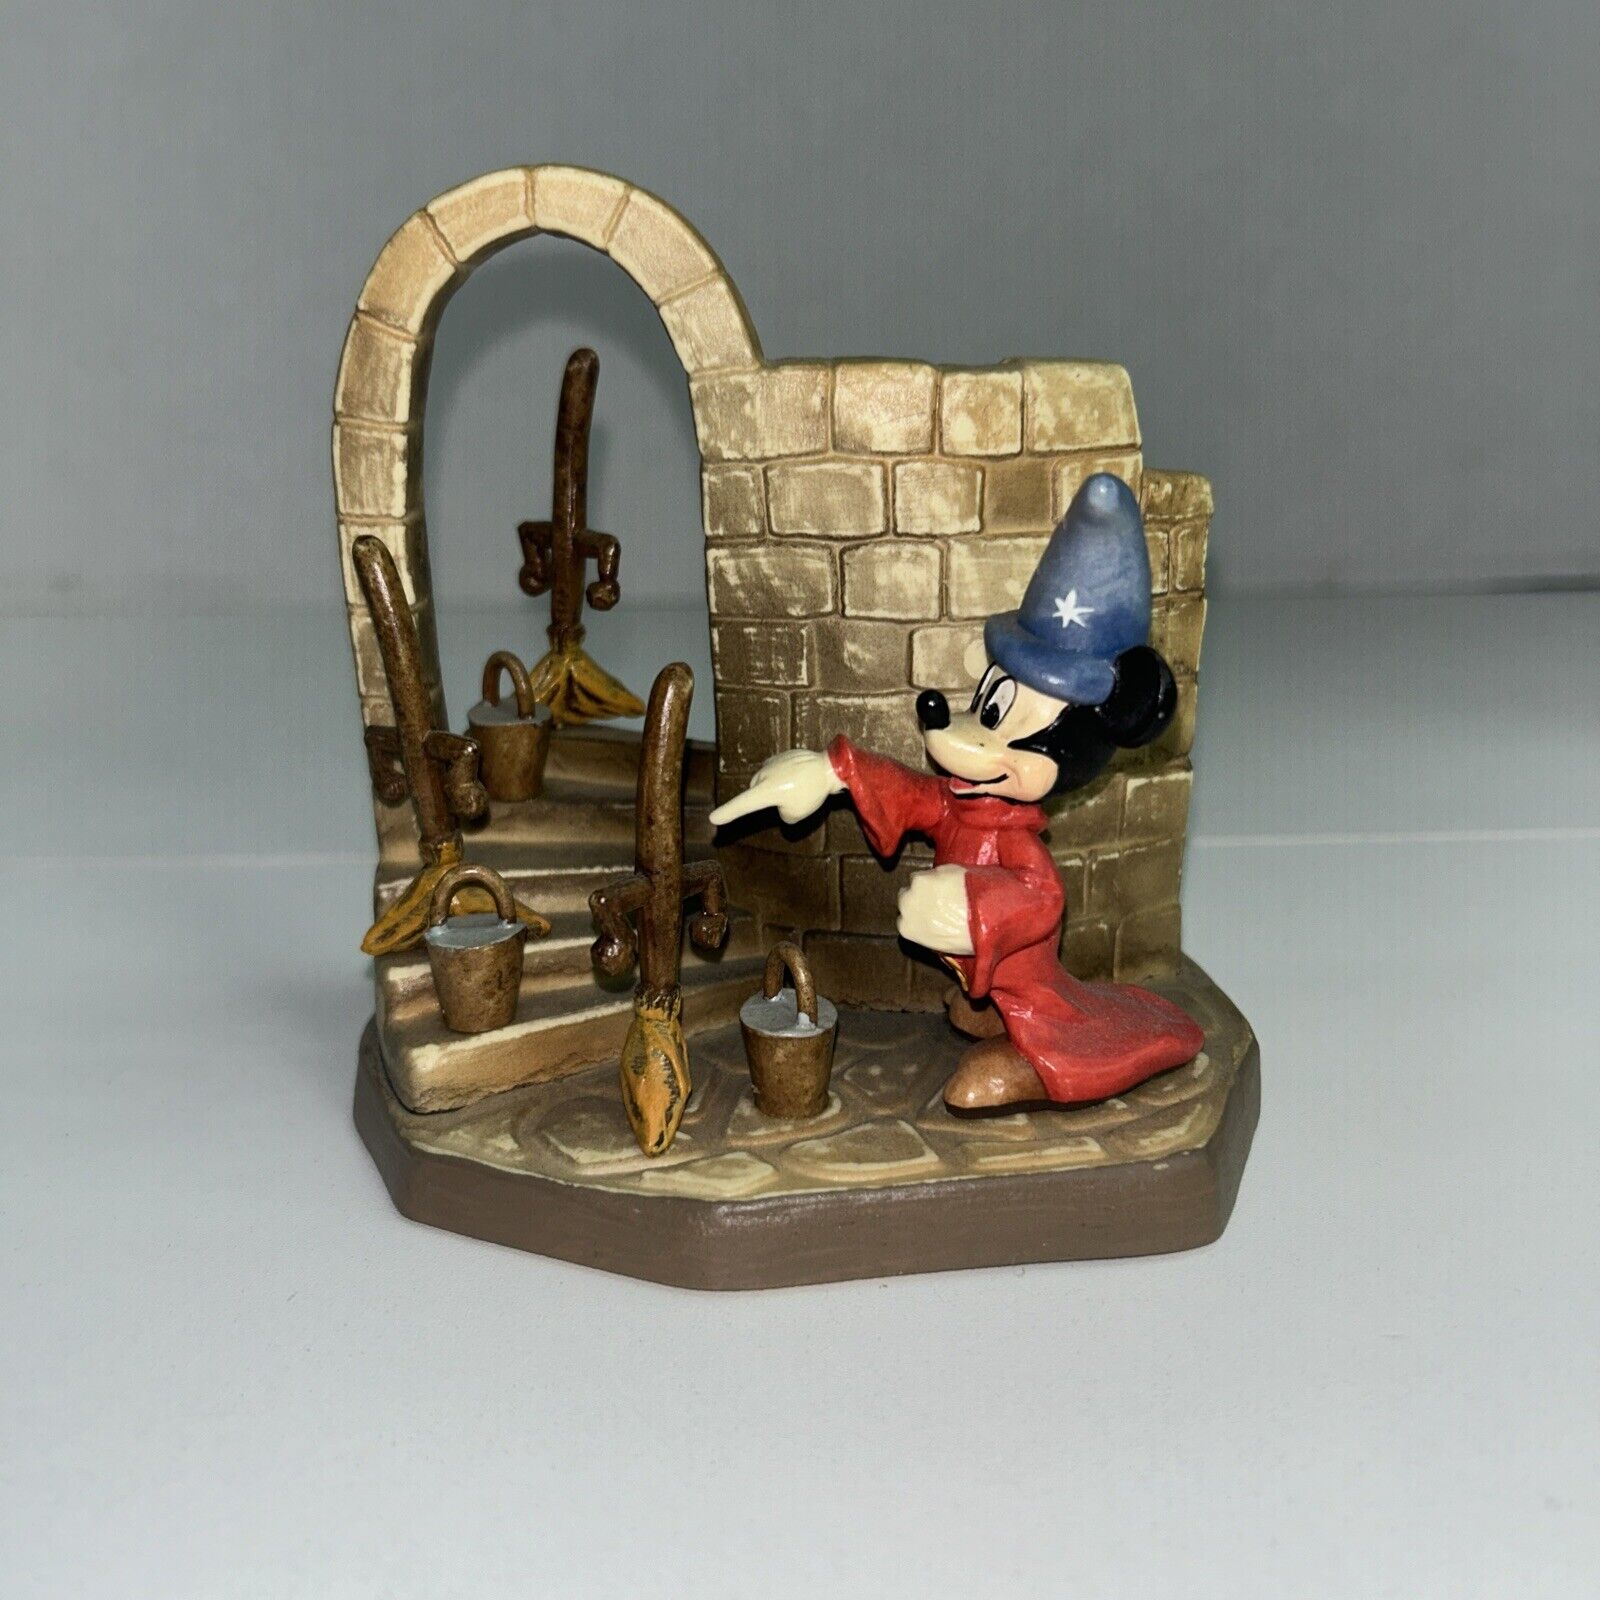 Disney Mickey Sorcerer Figurine Made In Italy By Anri Limited Numbered 274/2500